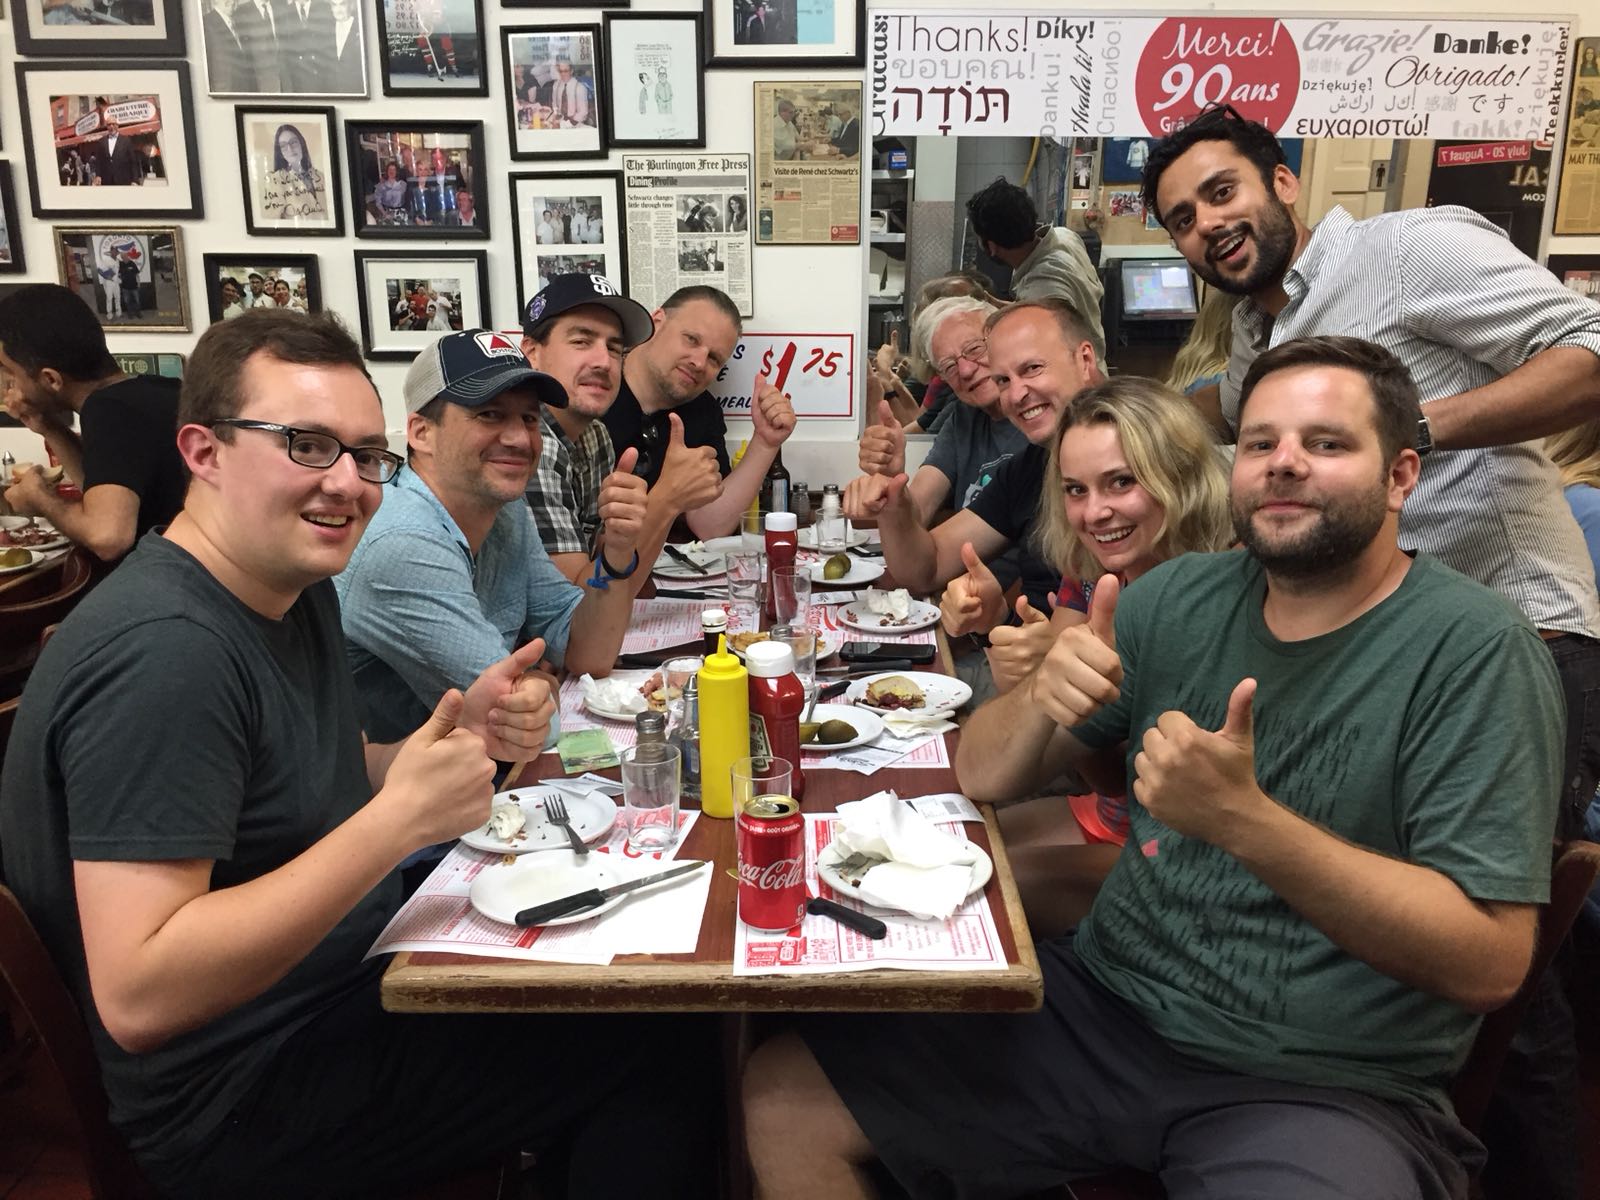 A group of a film crew sit together at a restaurant all giving the photographer a thumbs up